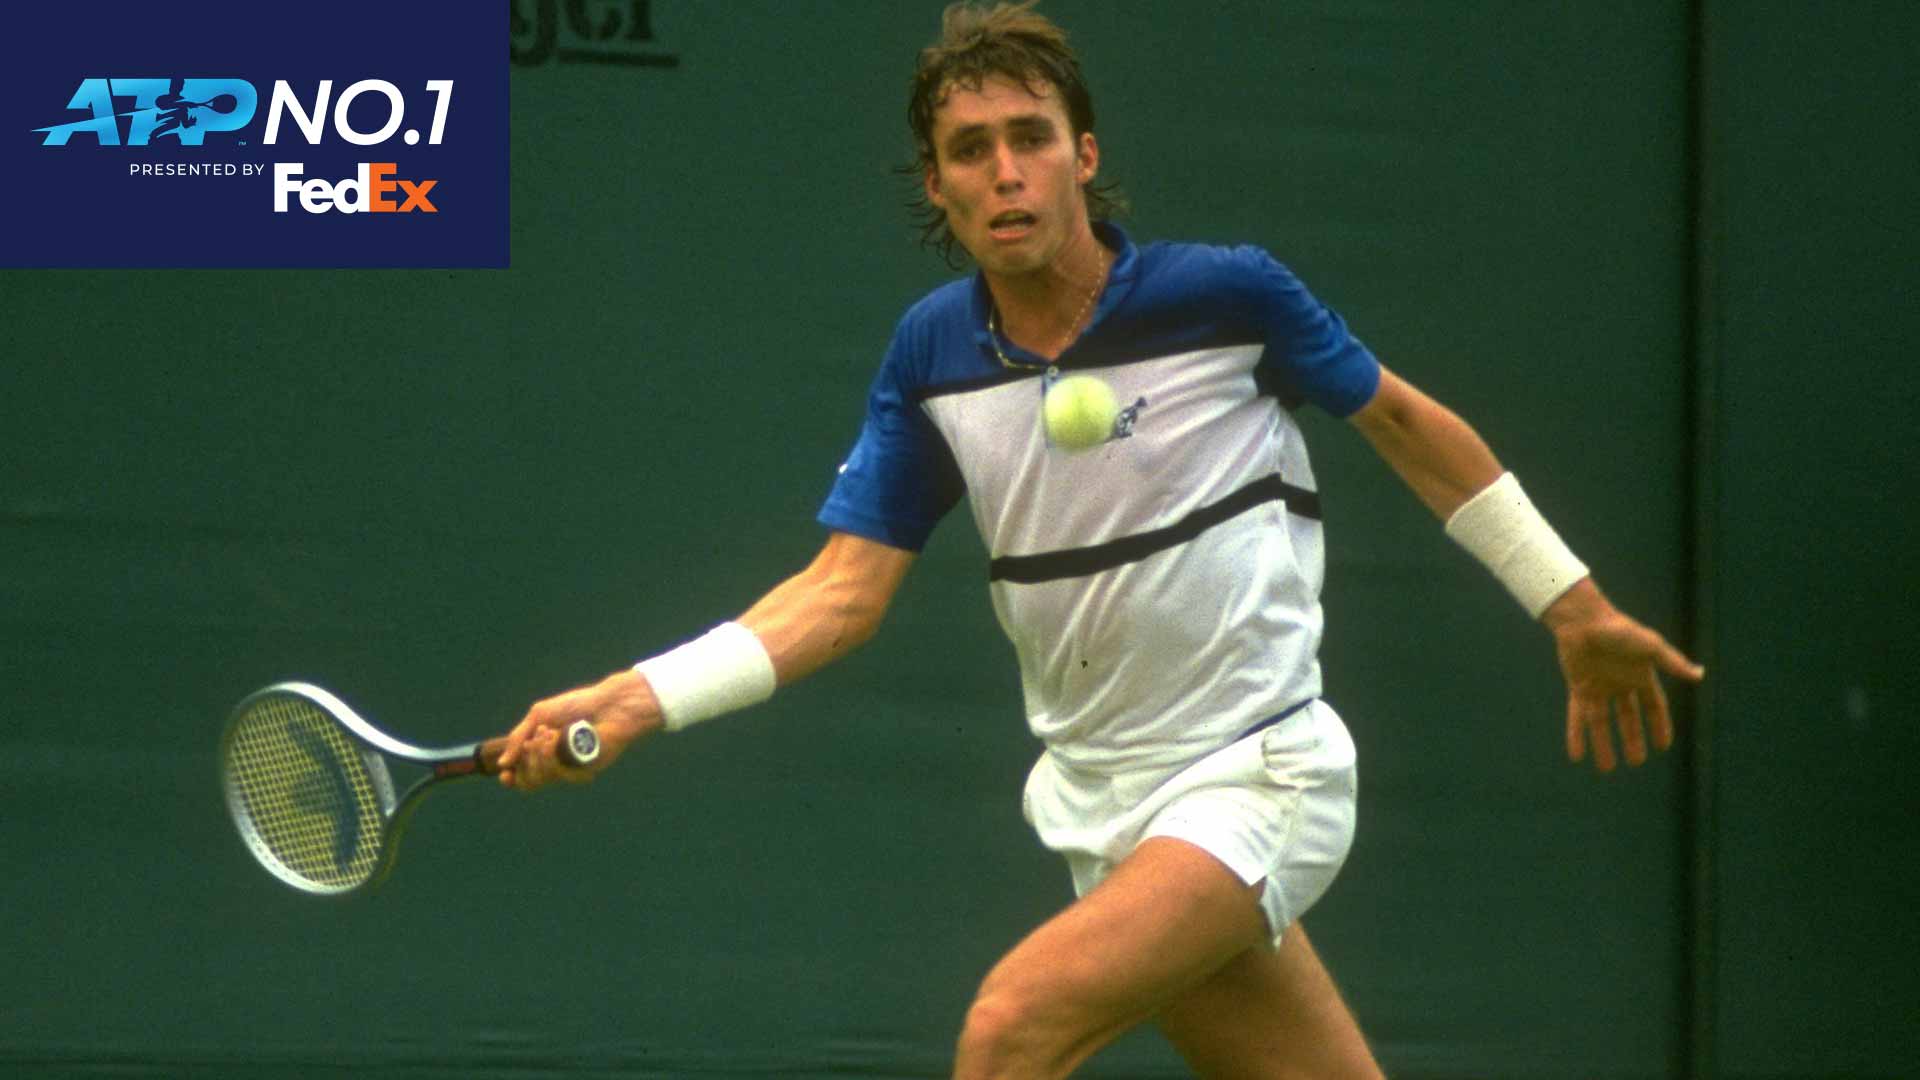 Ivan Lendl, in action at Wimbledon in 1981, became the sixth player to rise to No. 1 in the FedEx ATP Rankings.